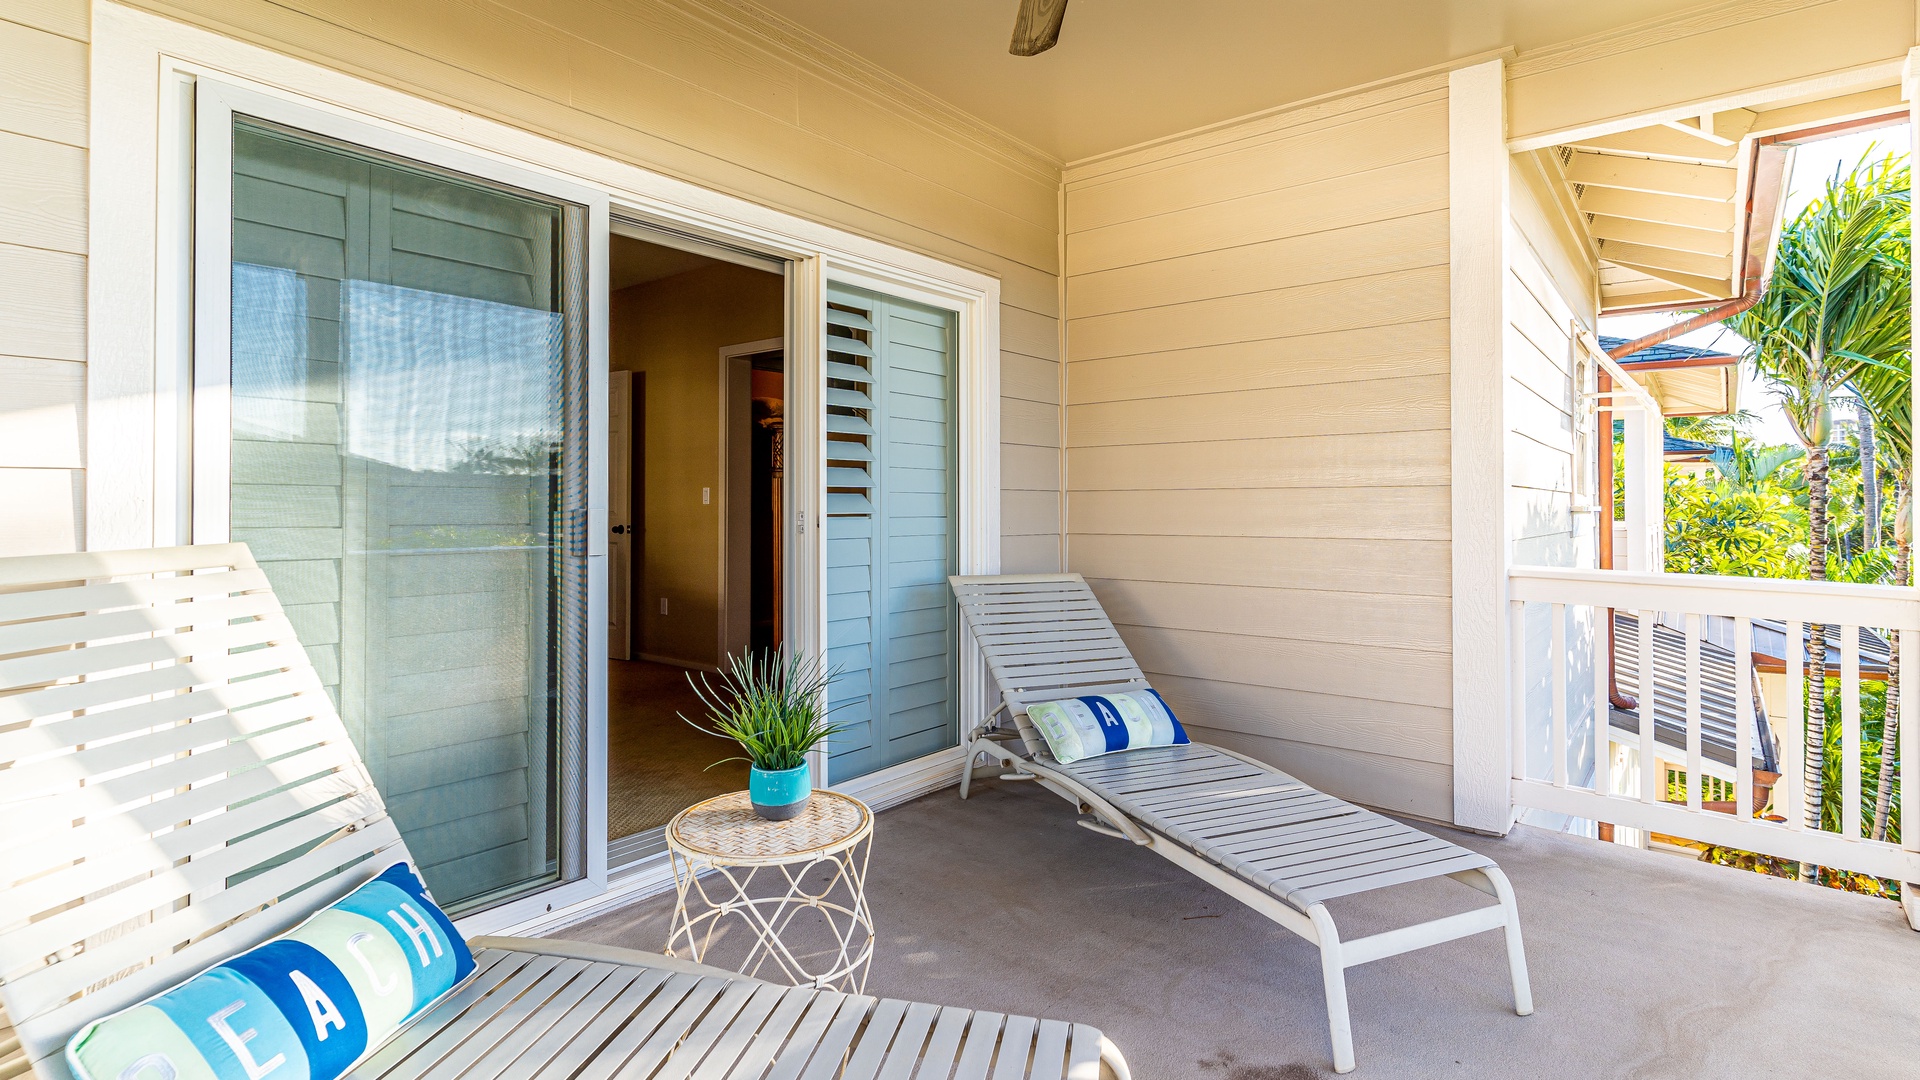 Kapolei Vacation Rentals, Coconut Plantation 1174-2 - Lounge chairs for relaxing on the lanai.